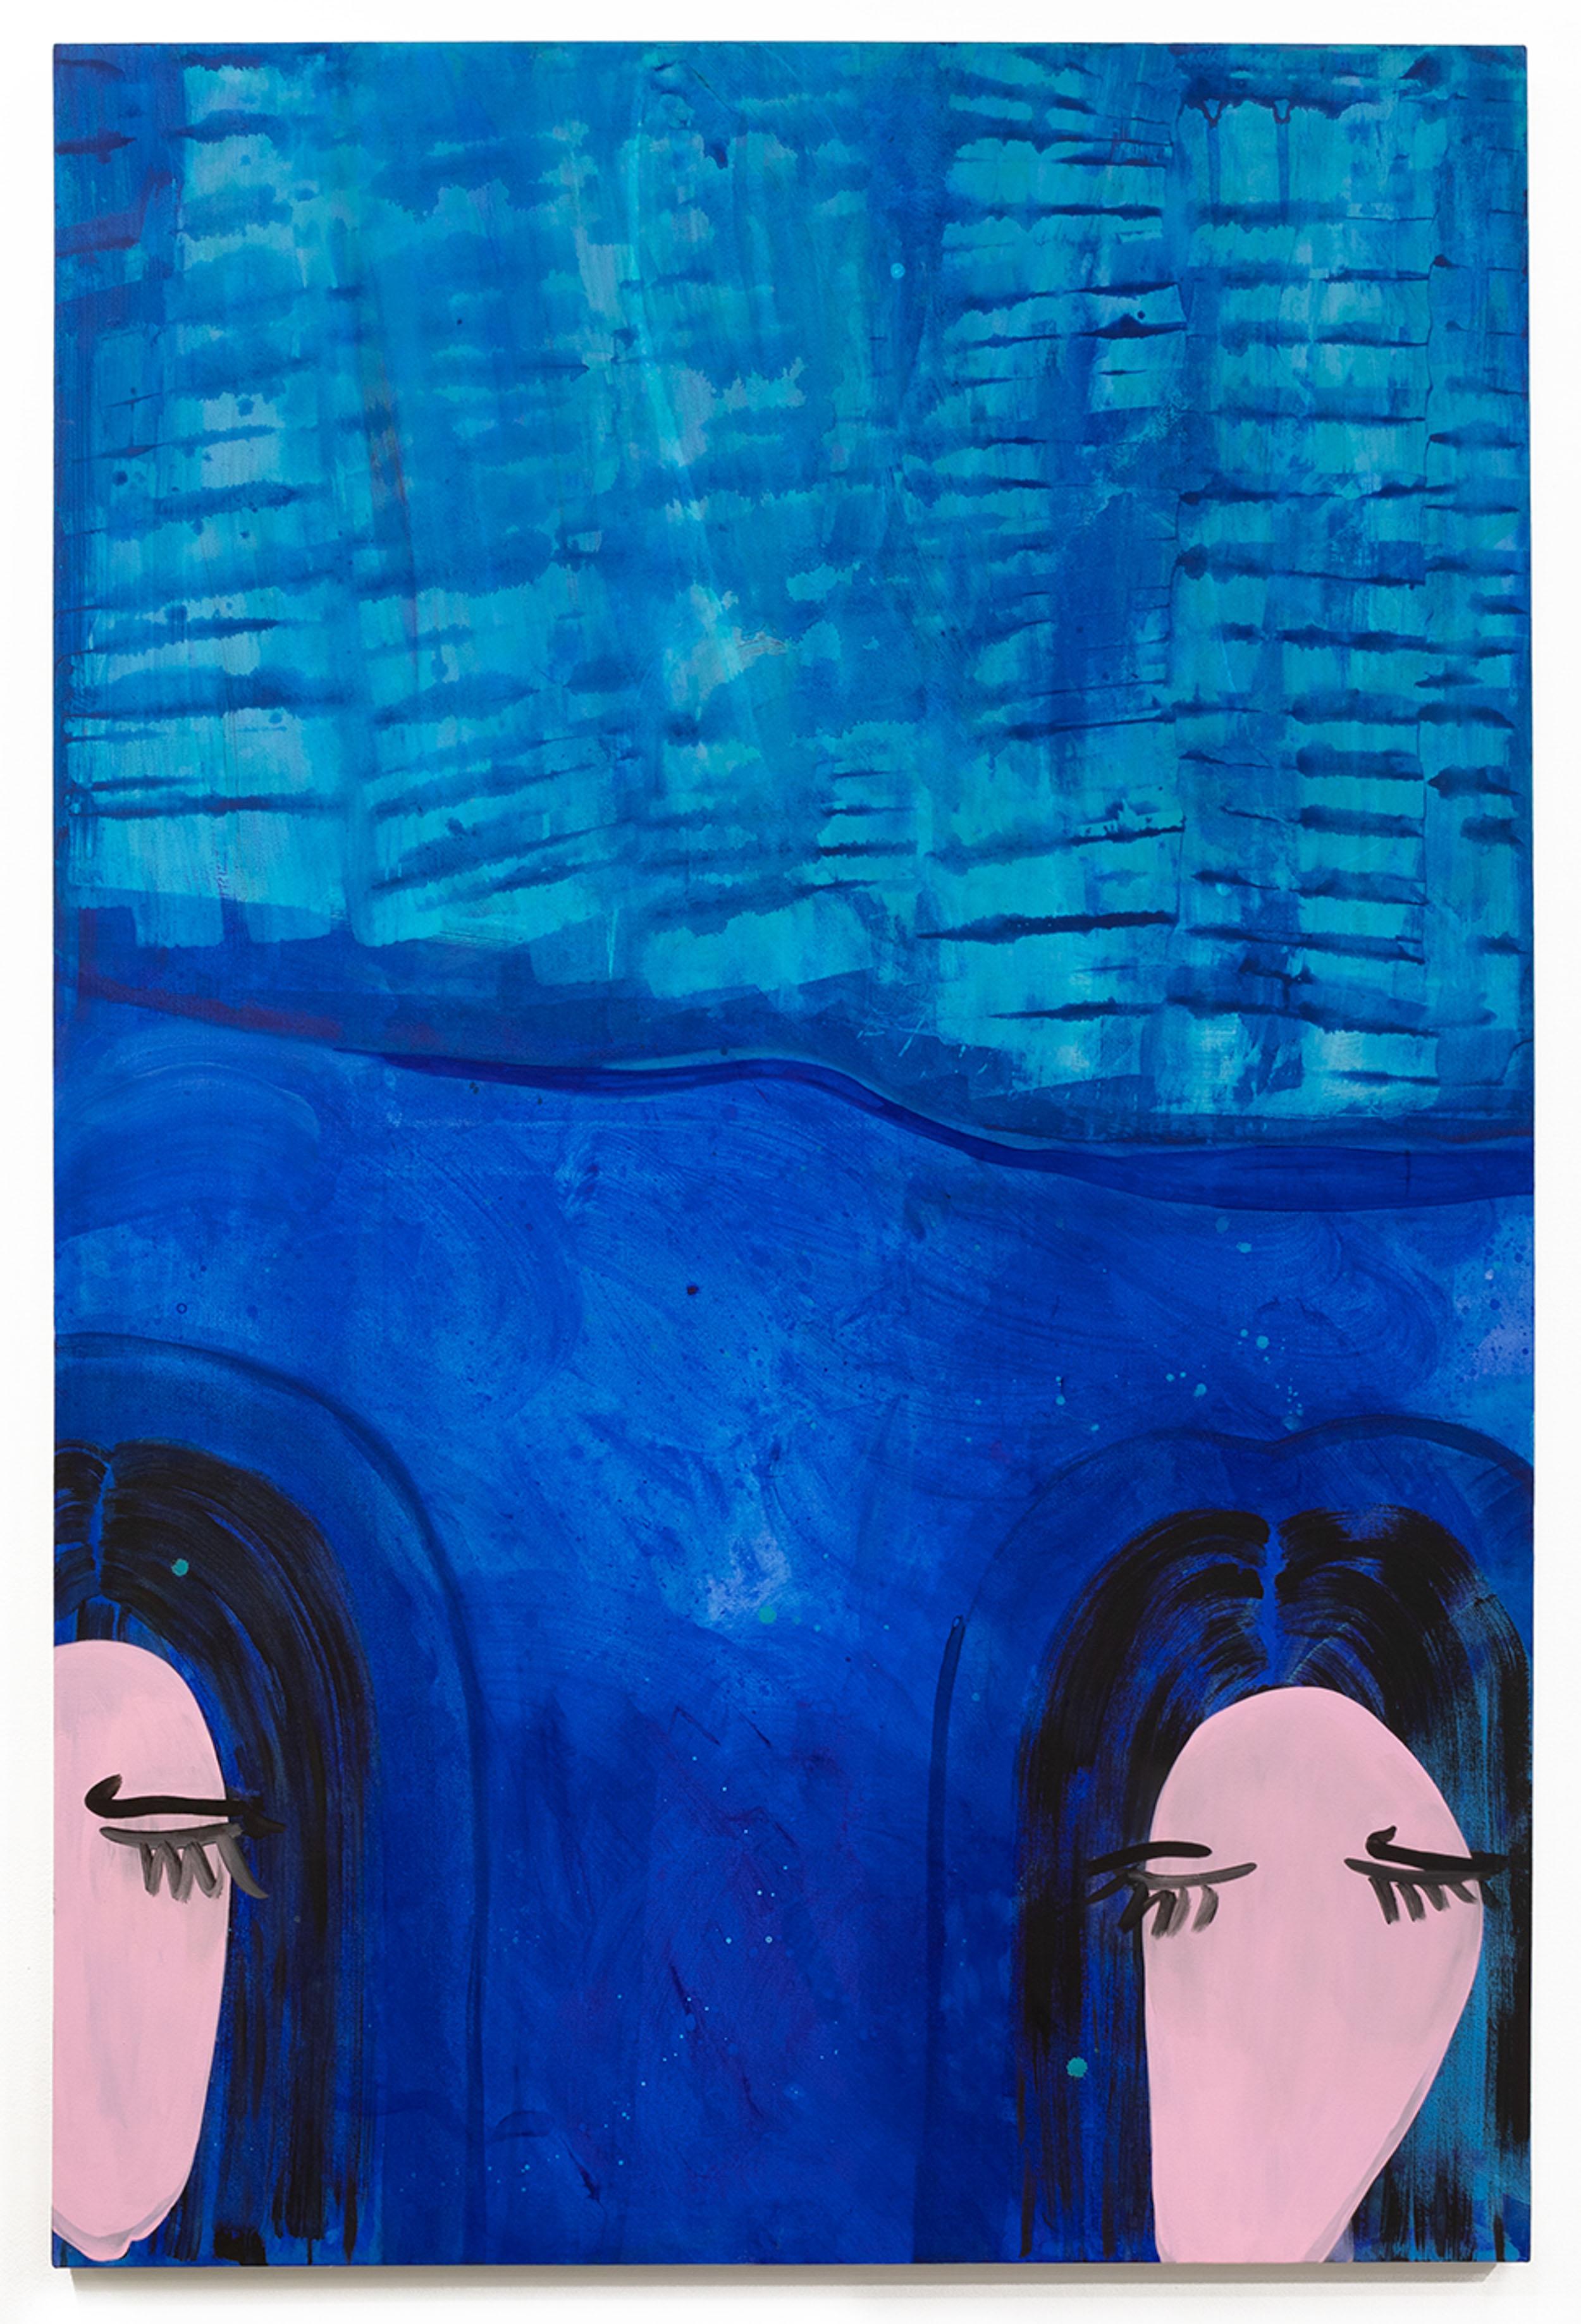 "SISTERS", Abstract, Figurative Painting, Acrylic on Canvas, Women, Blue Water